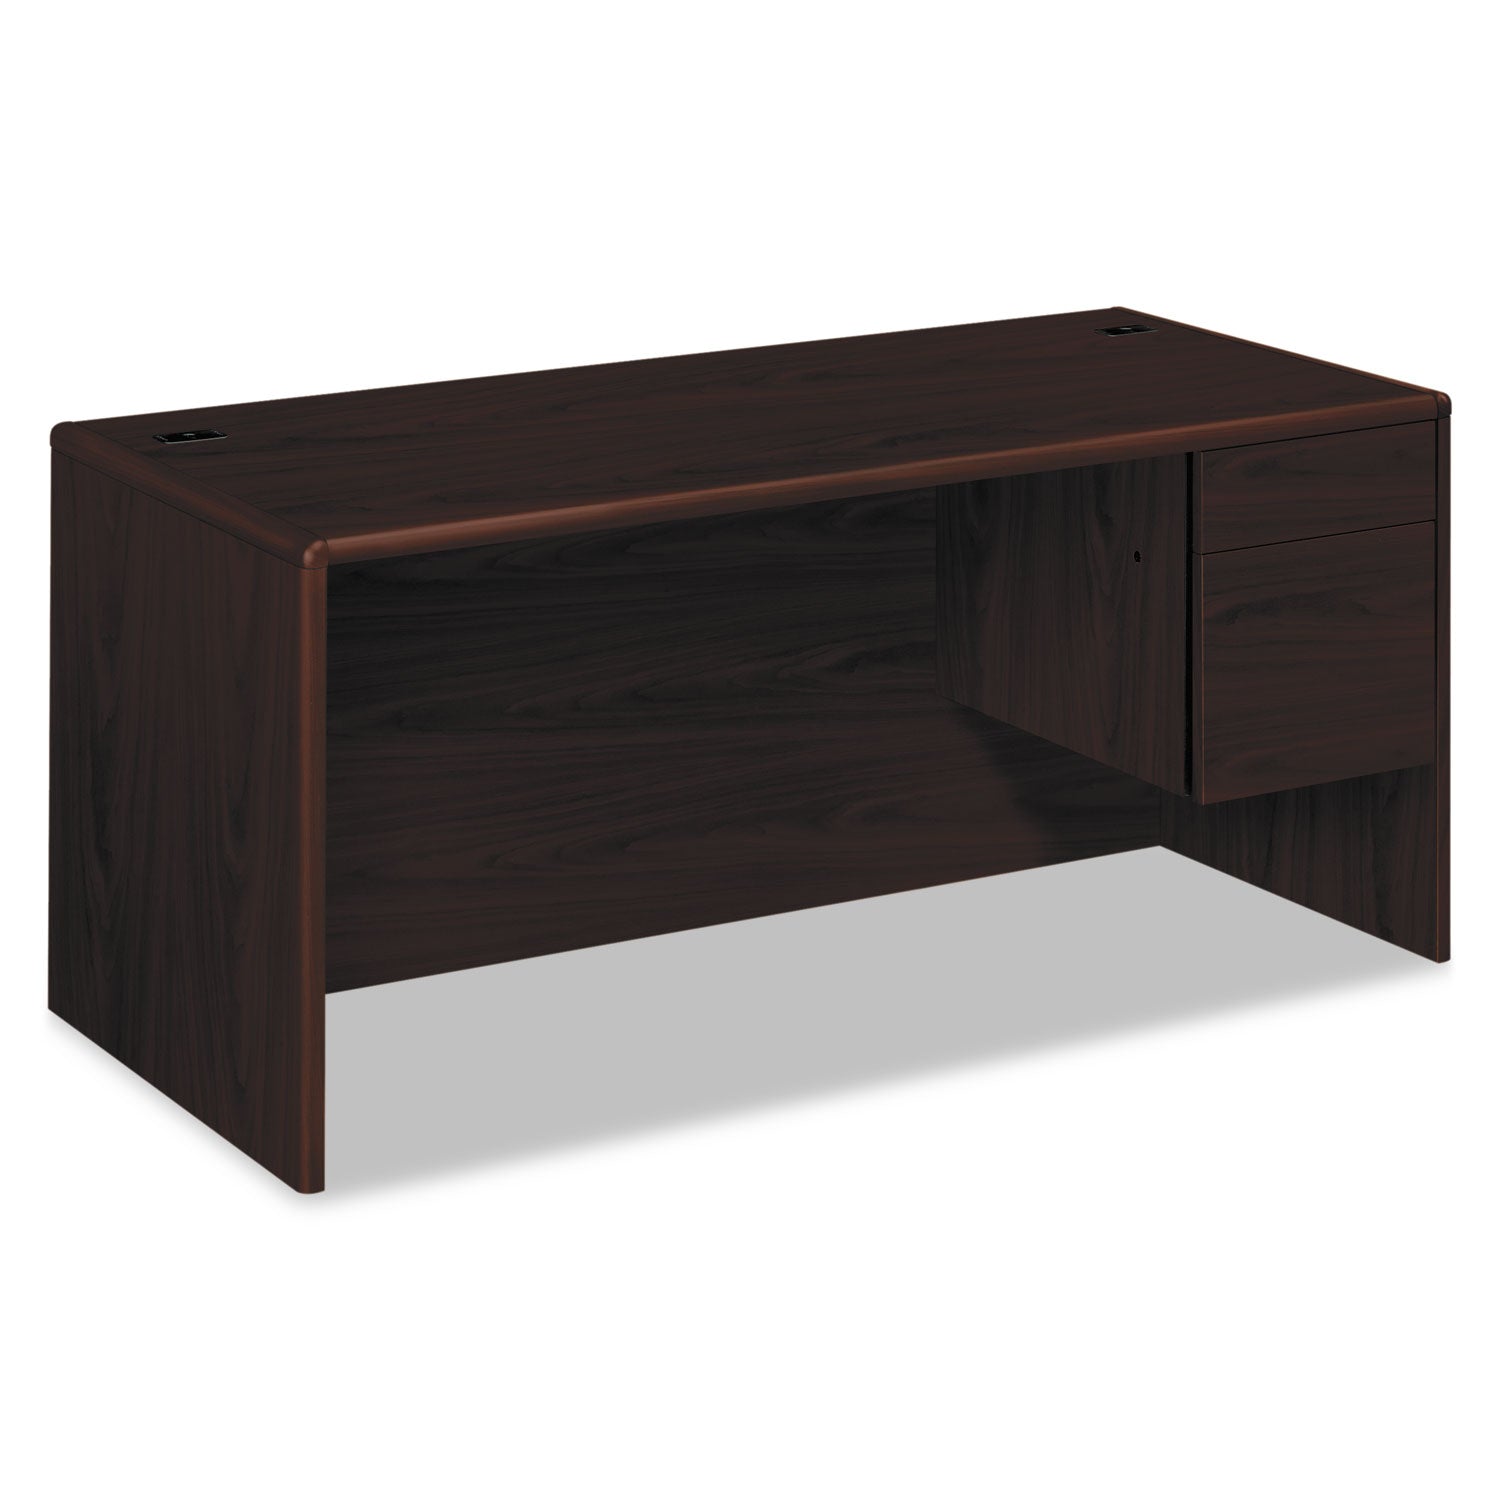 10700 Series "L" Workstation Desk with Three-Quarter Height Pedestal on Right, 66" x 30" x 29.5", Mahogany - 